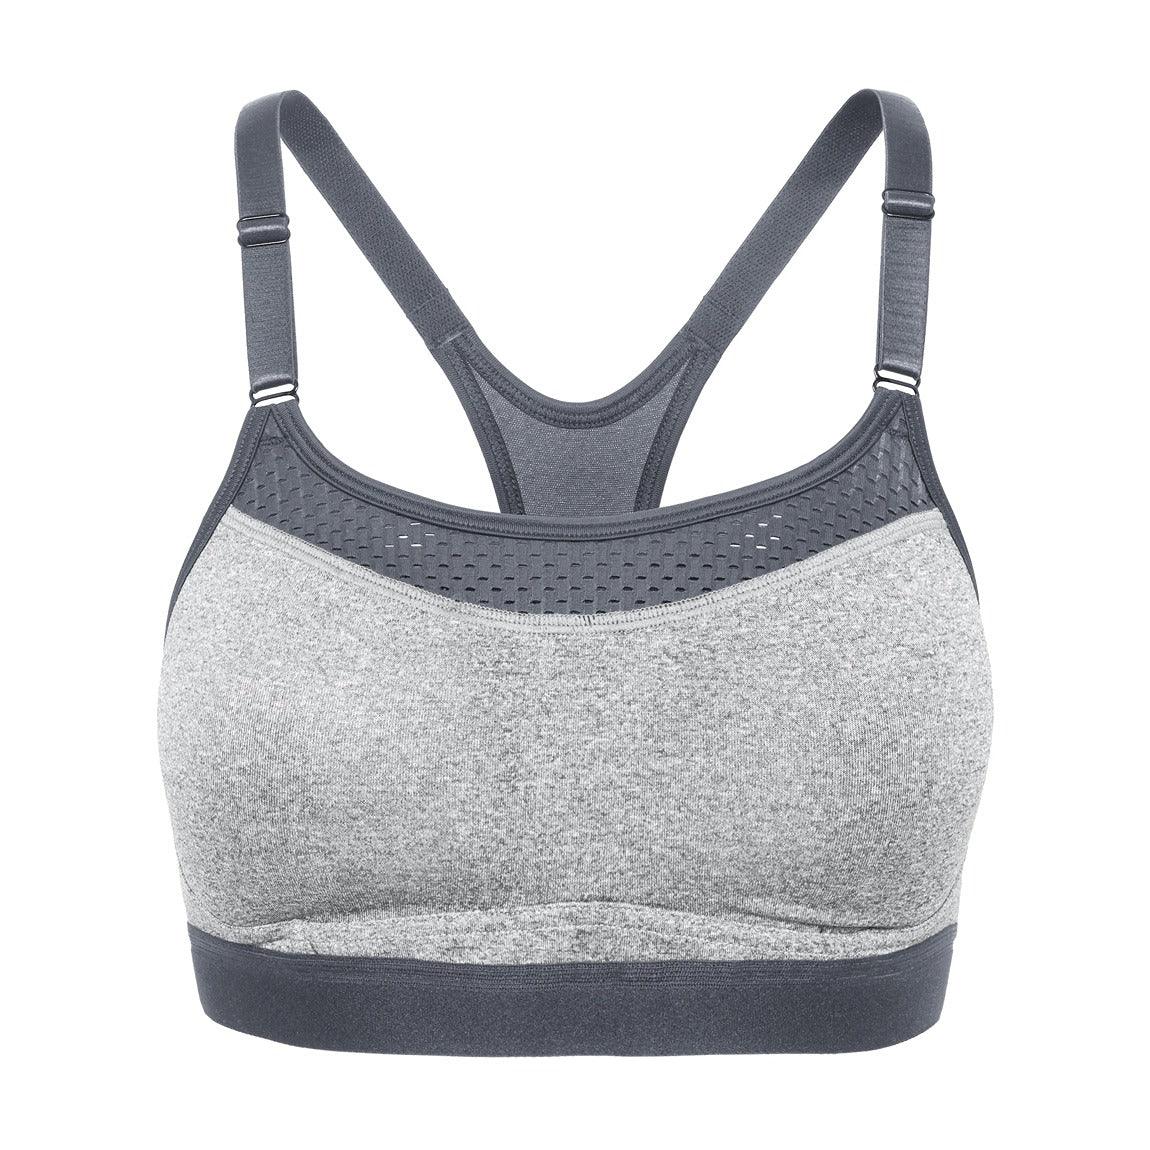 The Show-Off Sports Bra